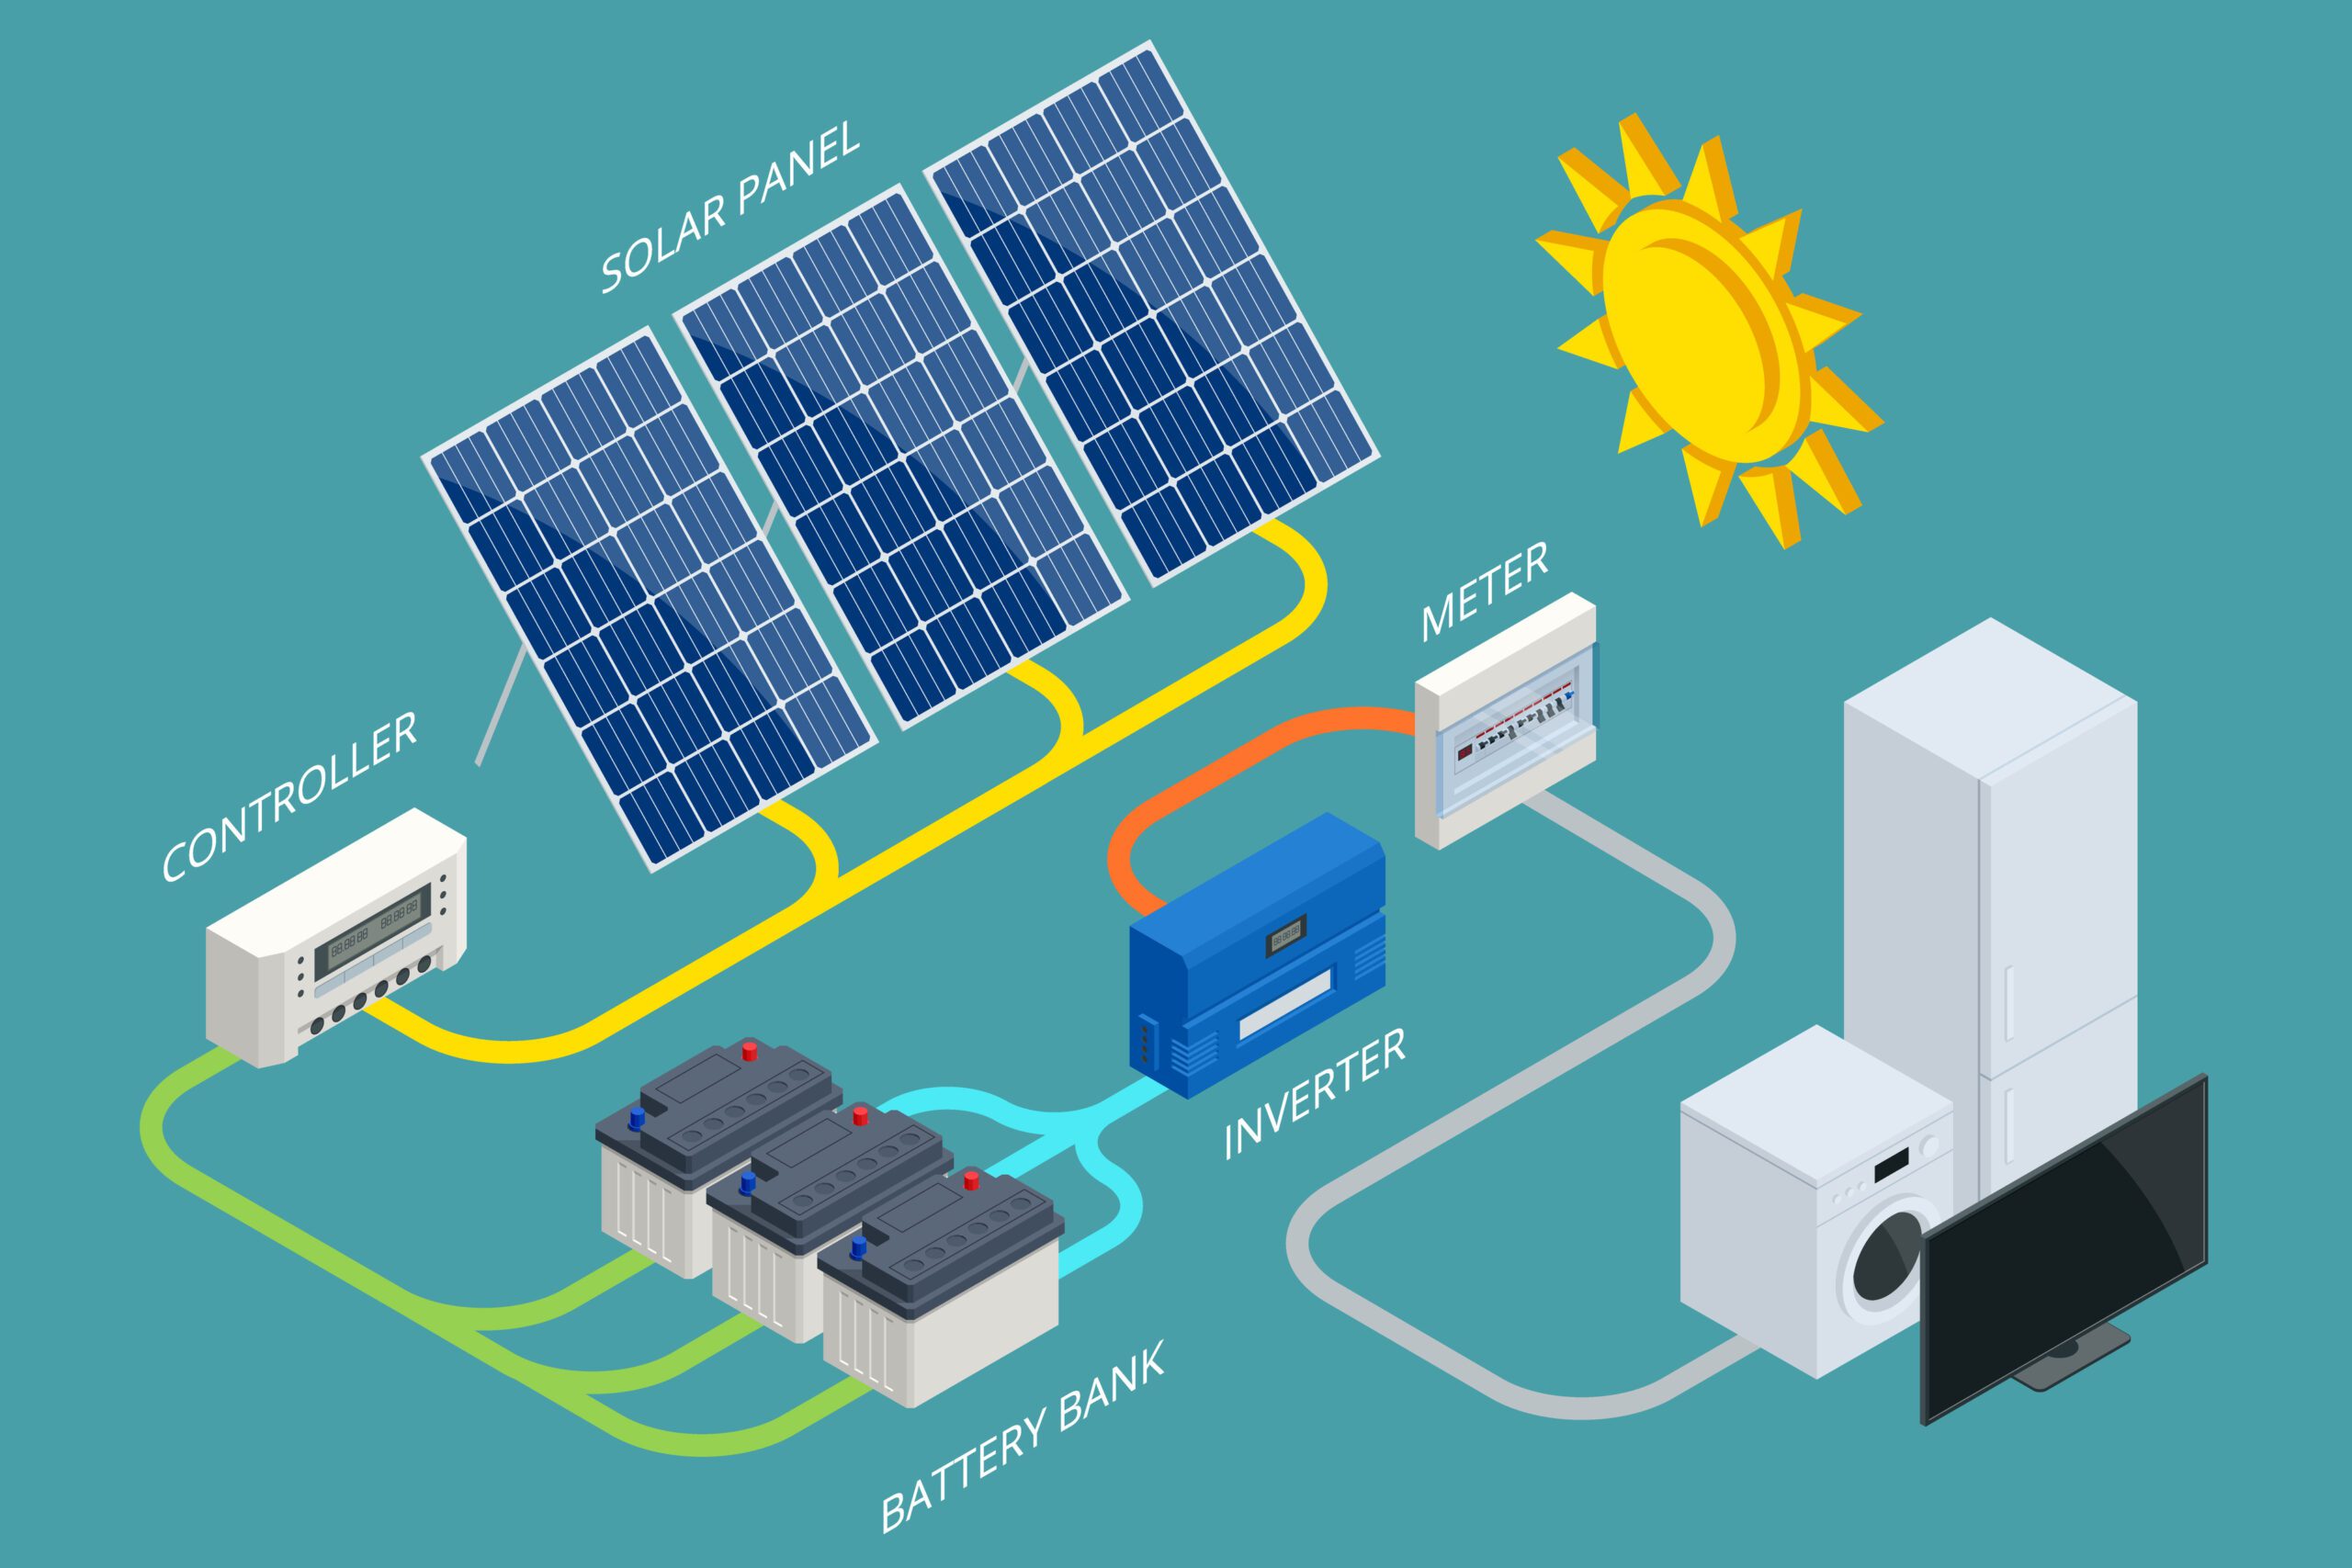 An infographic depicting how solar panels generate electricity and power home appliances